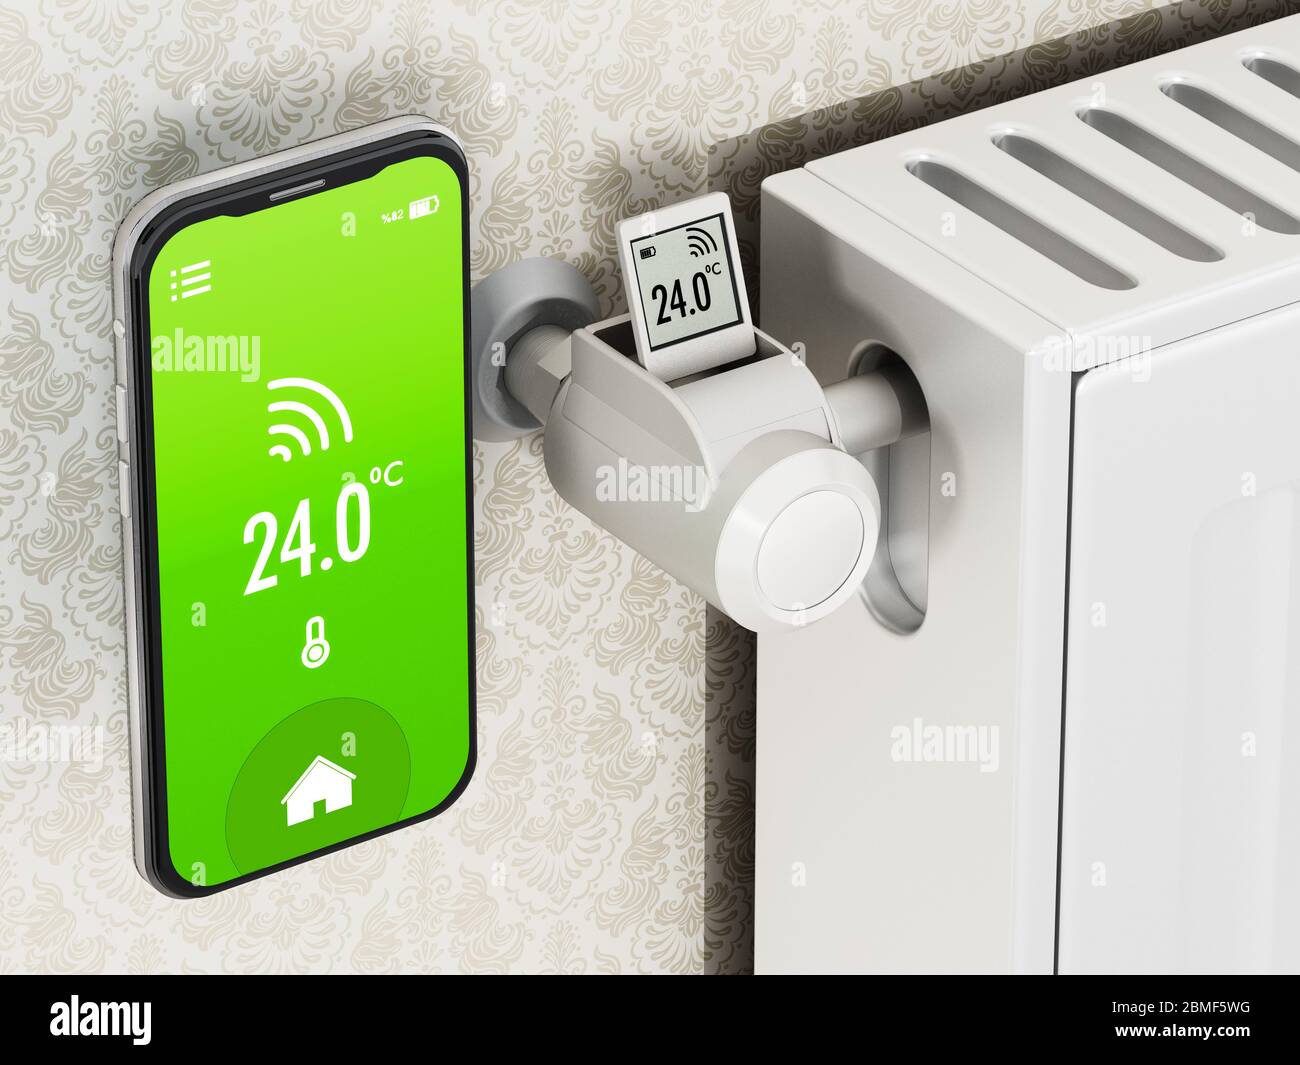 Smartphone and thermostatic radiator valve with LCD screen. 3D illustration. Stock Photo